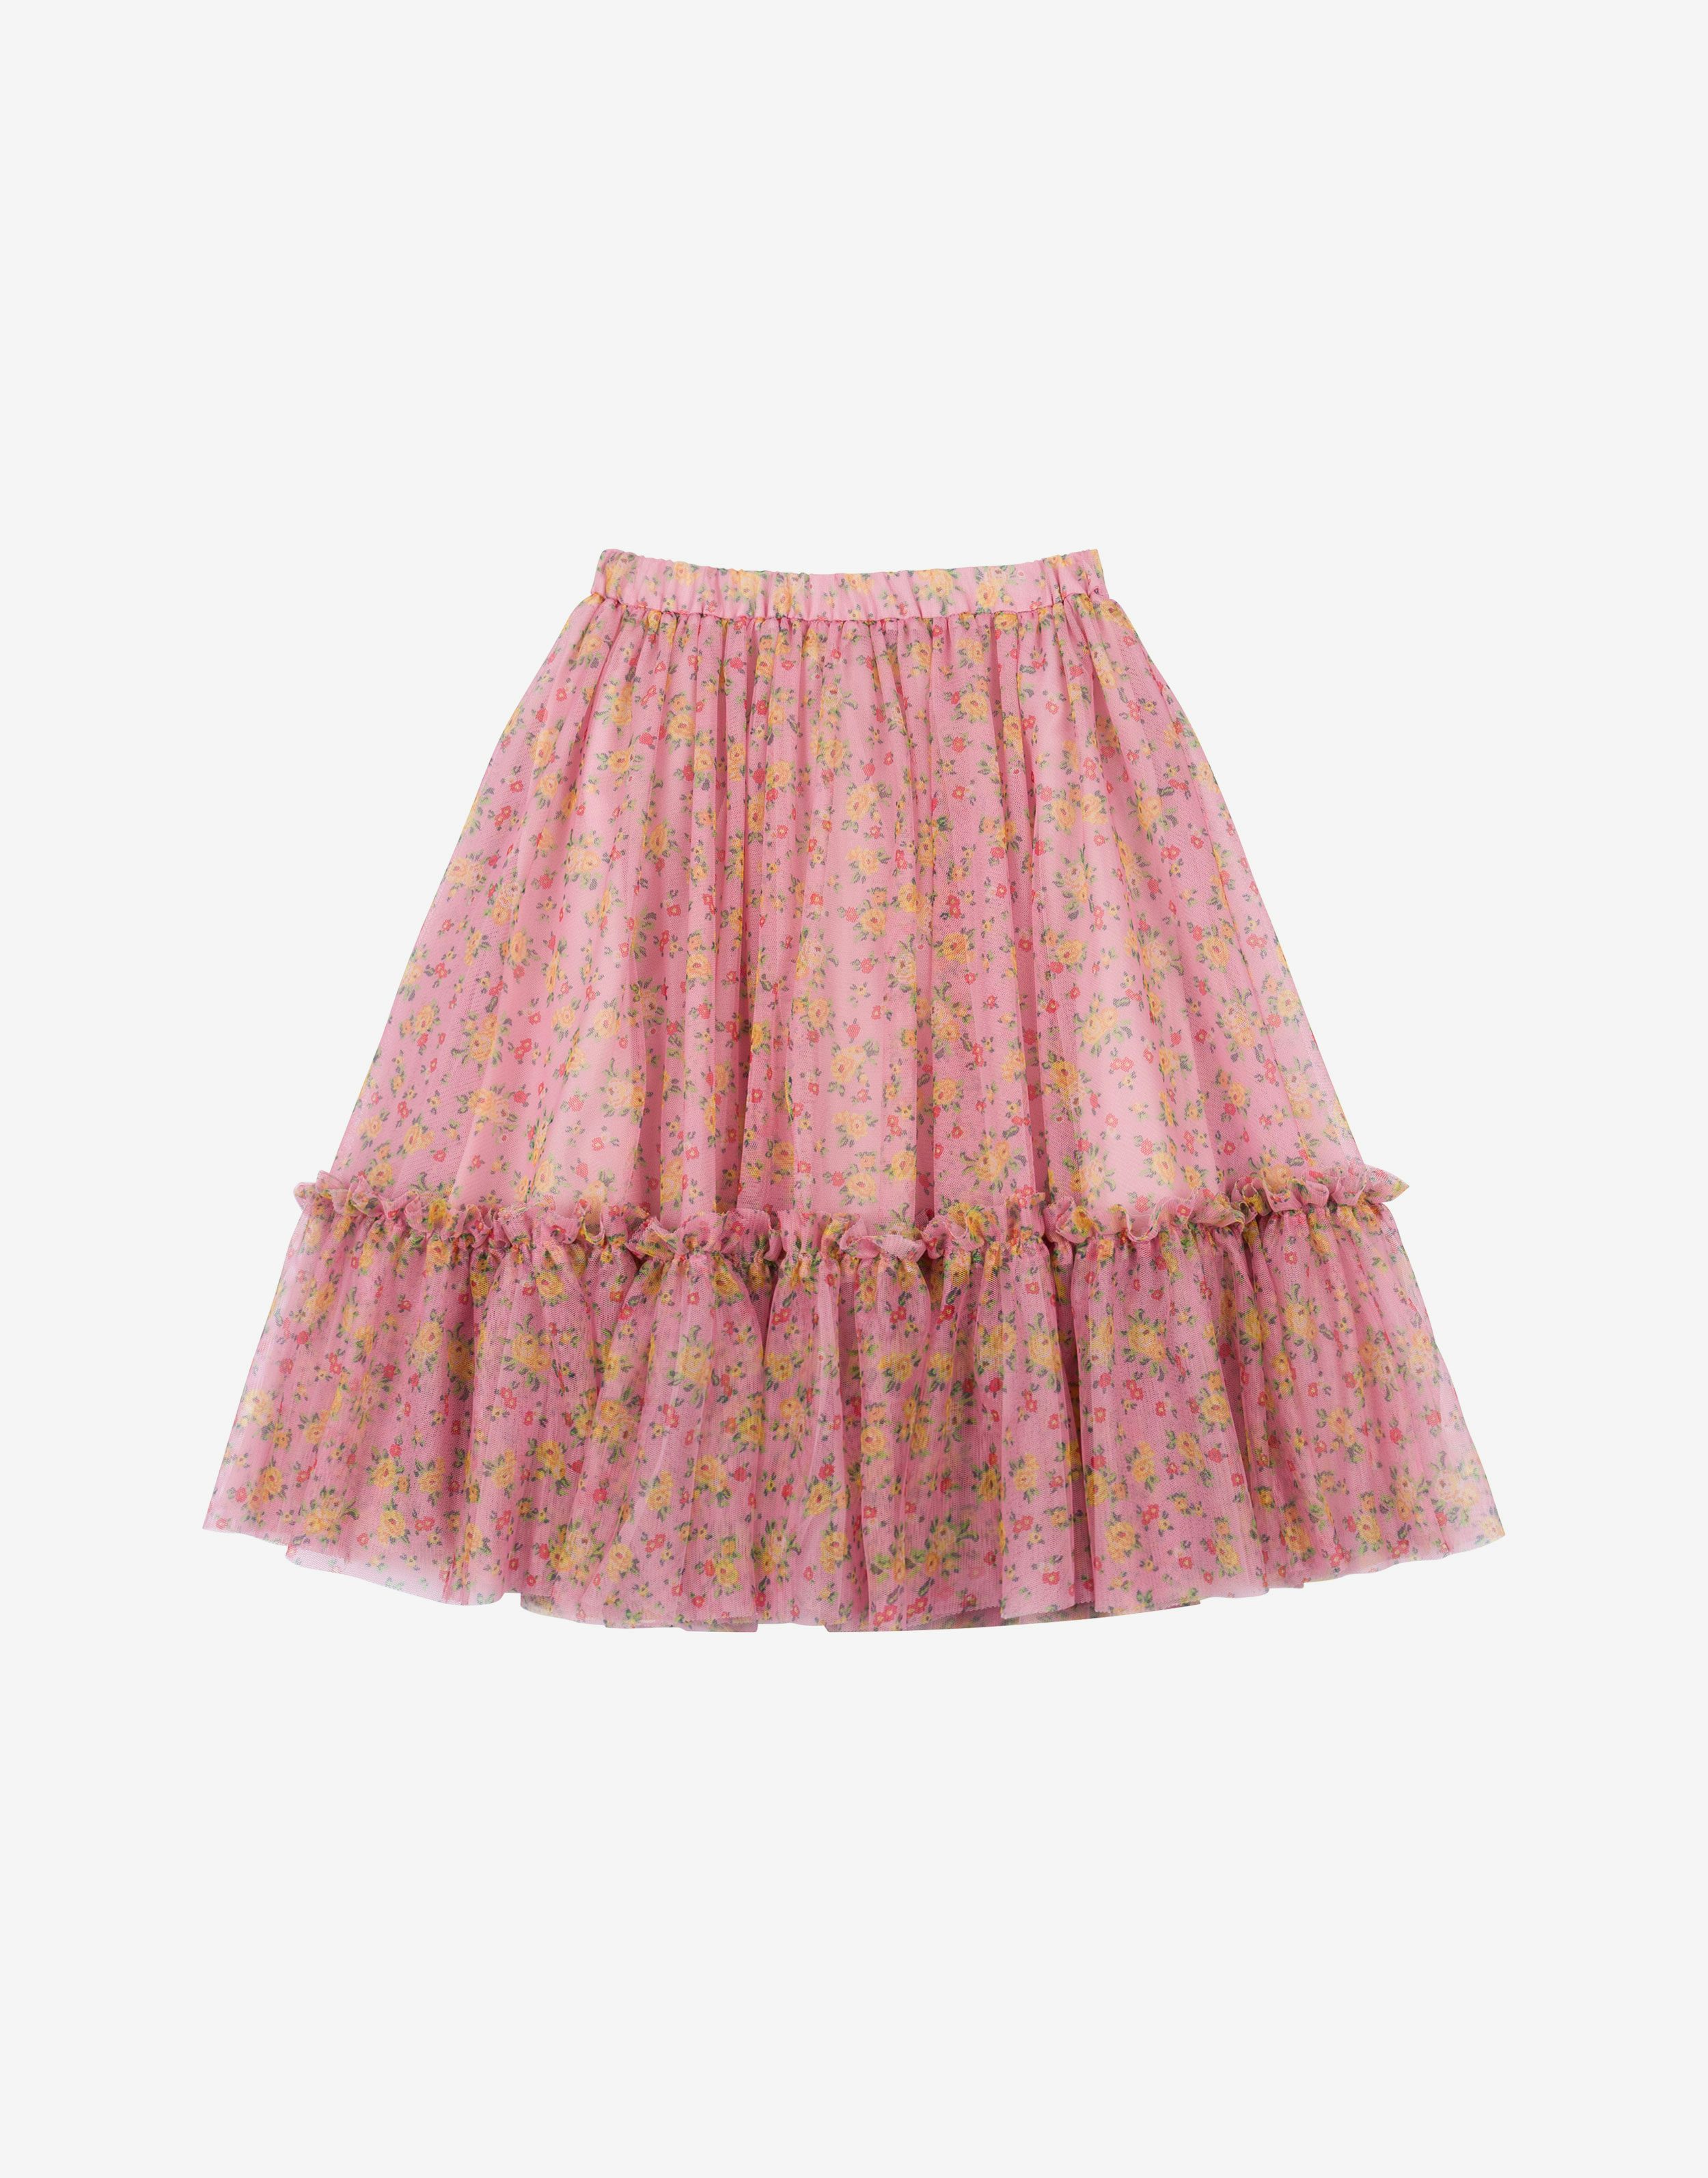 Kids' tulle skirt with floral print